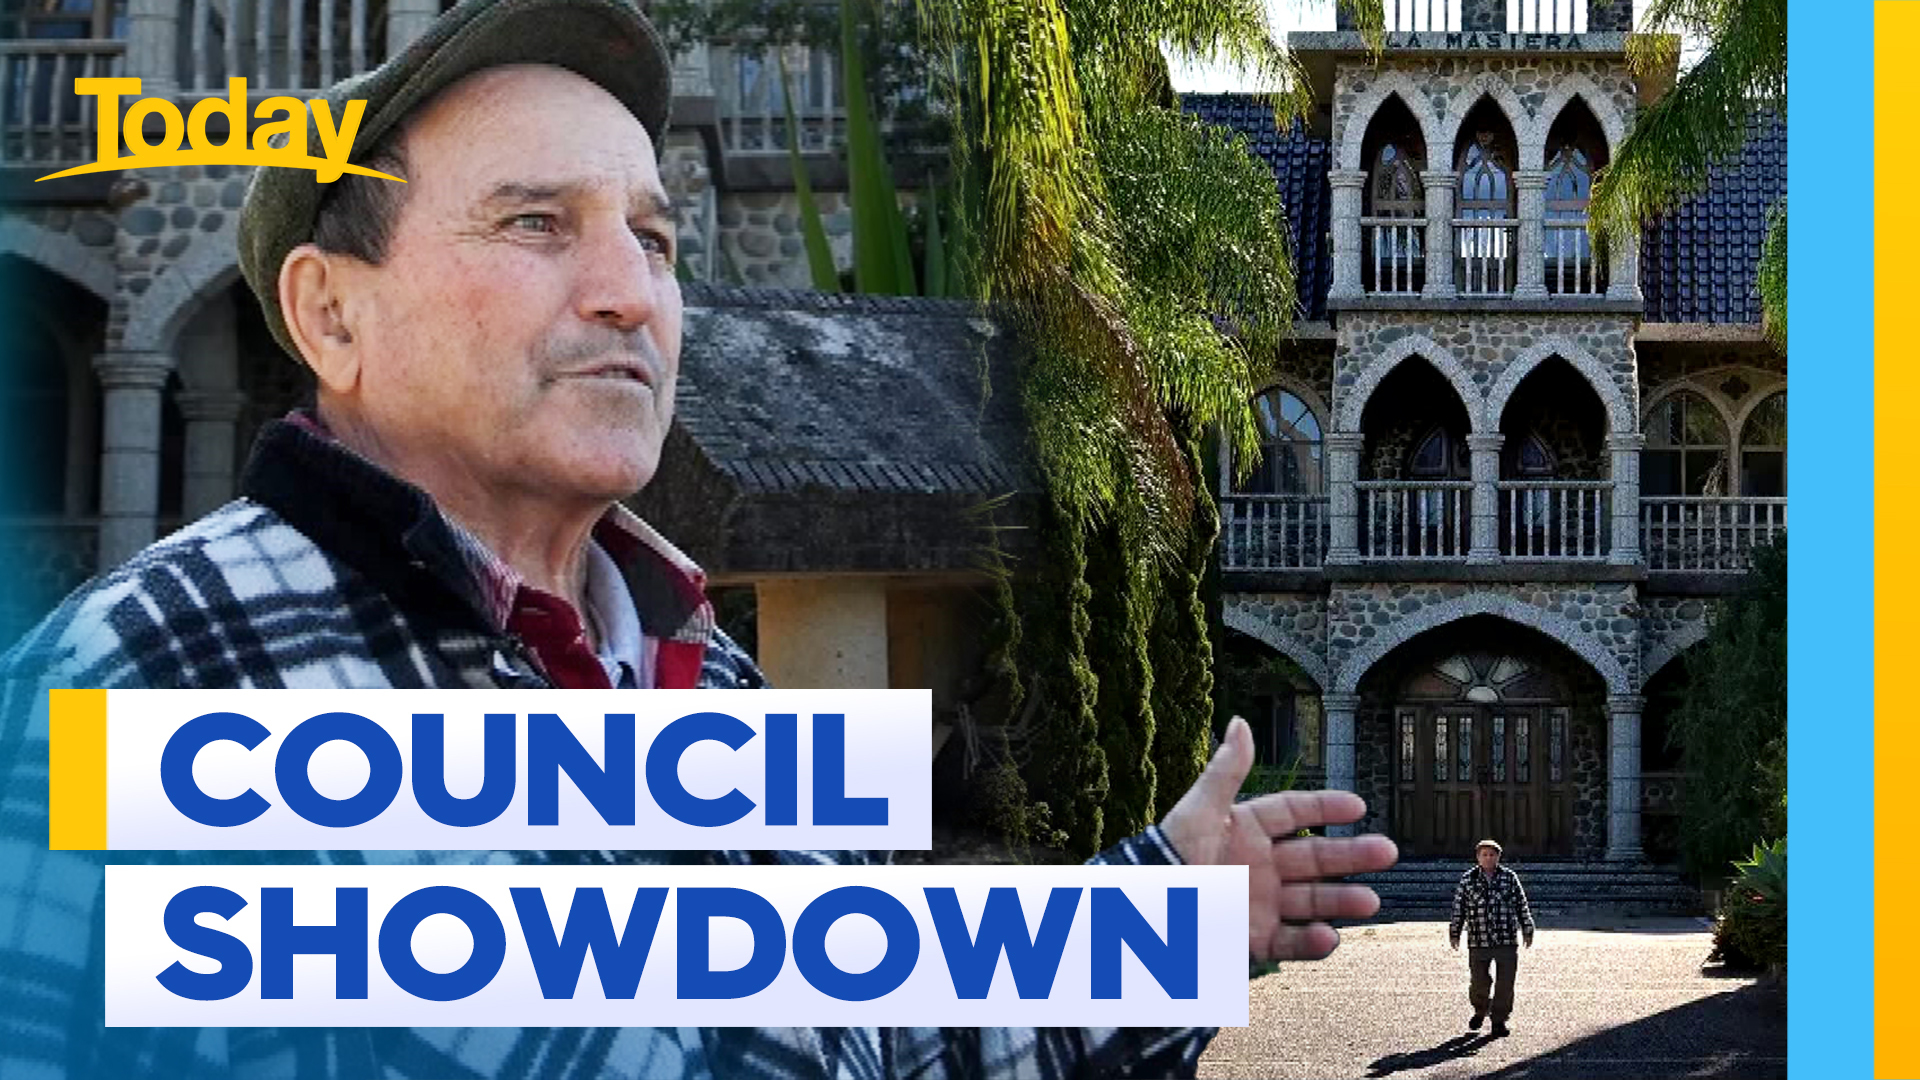 Western Sydney grandfather battling to save his 'castle' from council